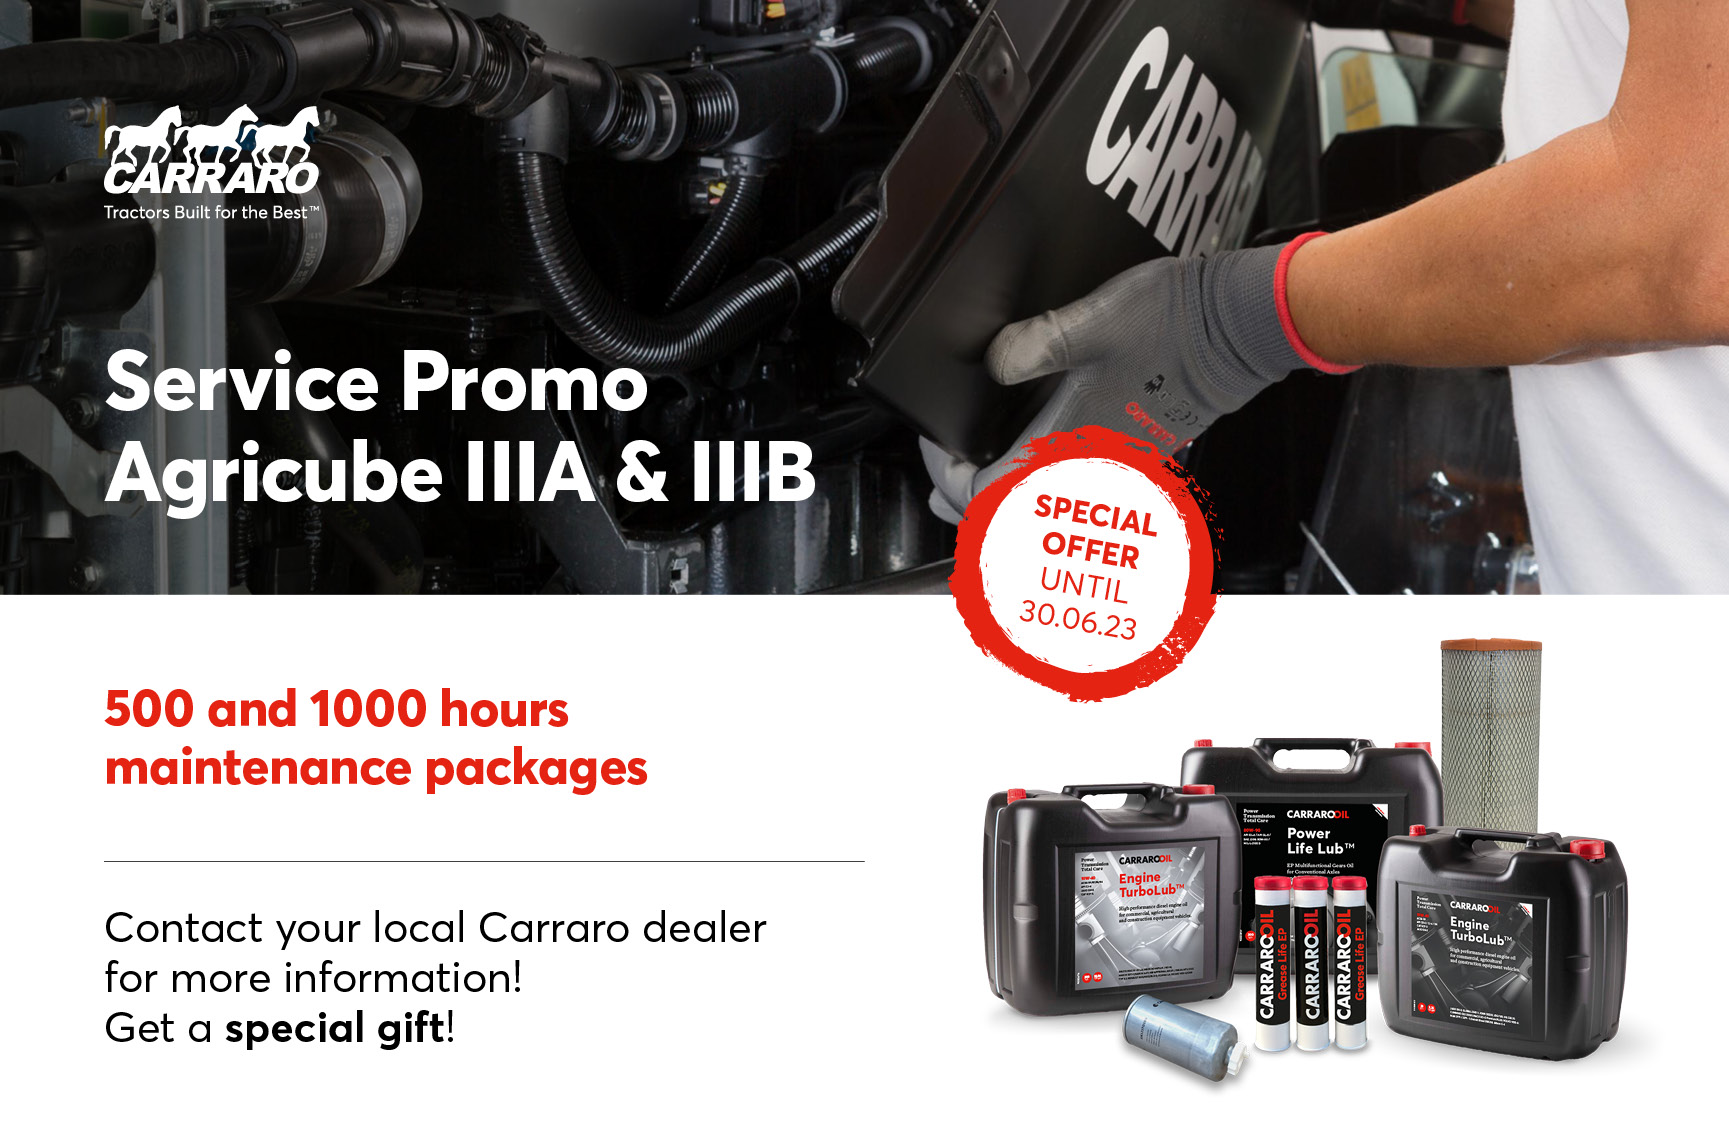 Service Promo: maintenance packages for your tractor!